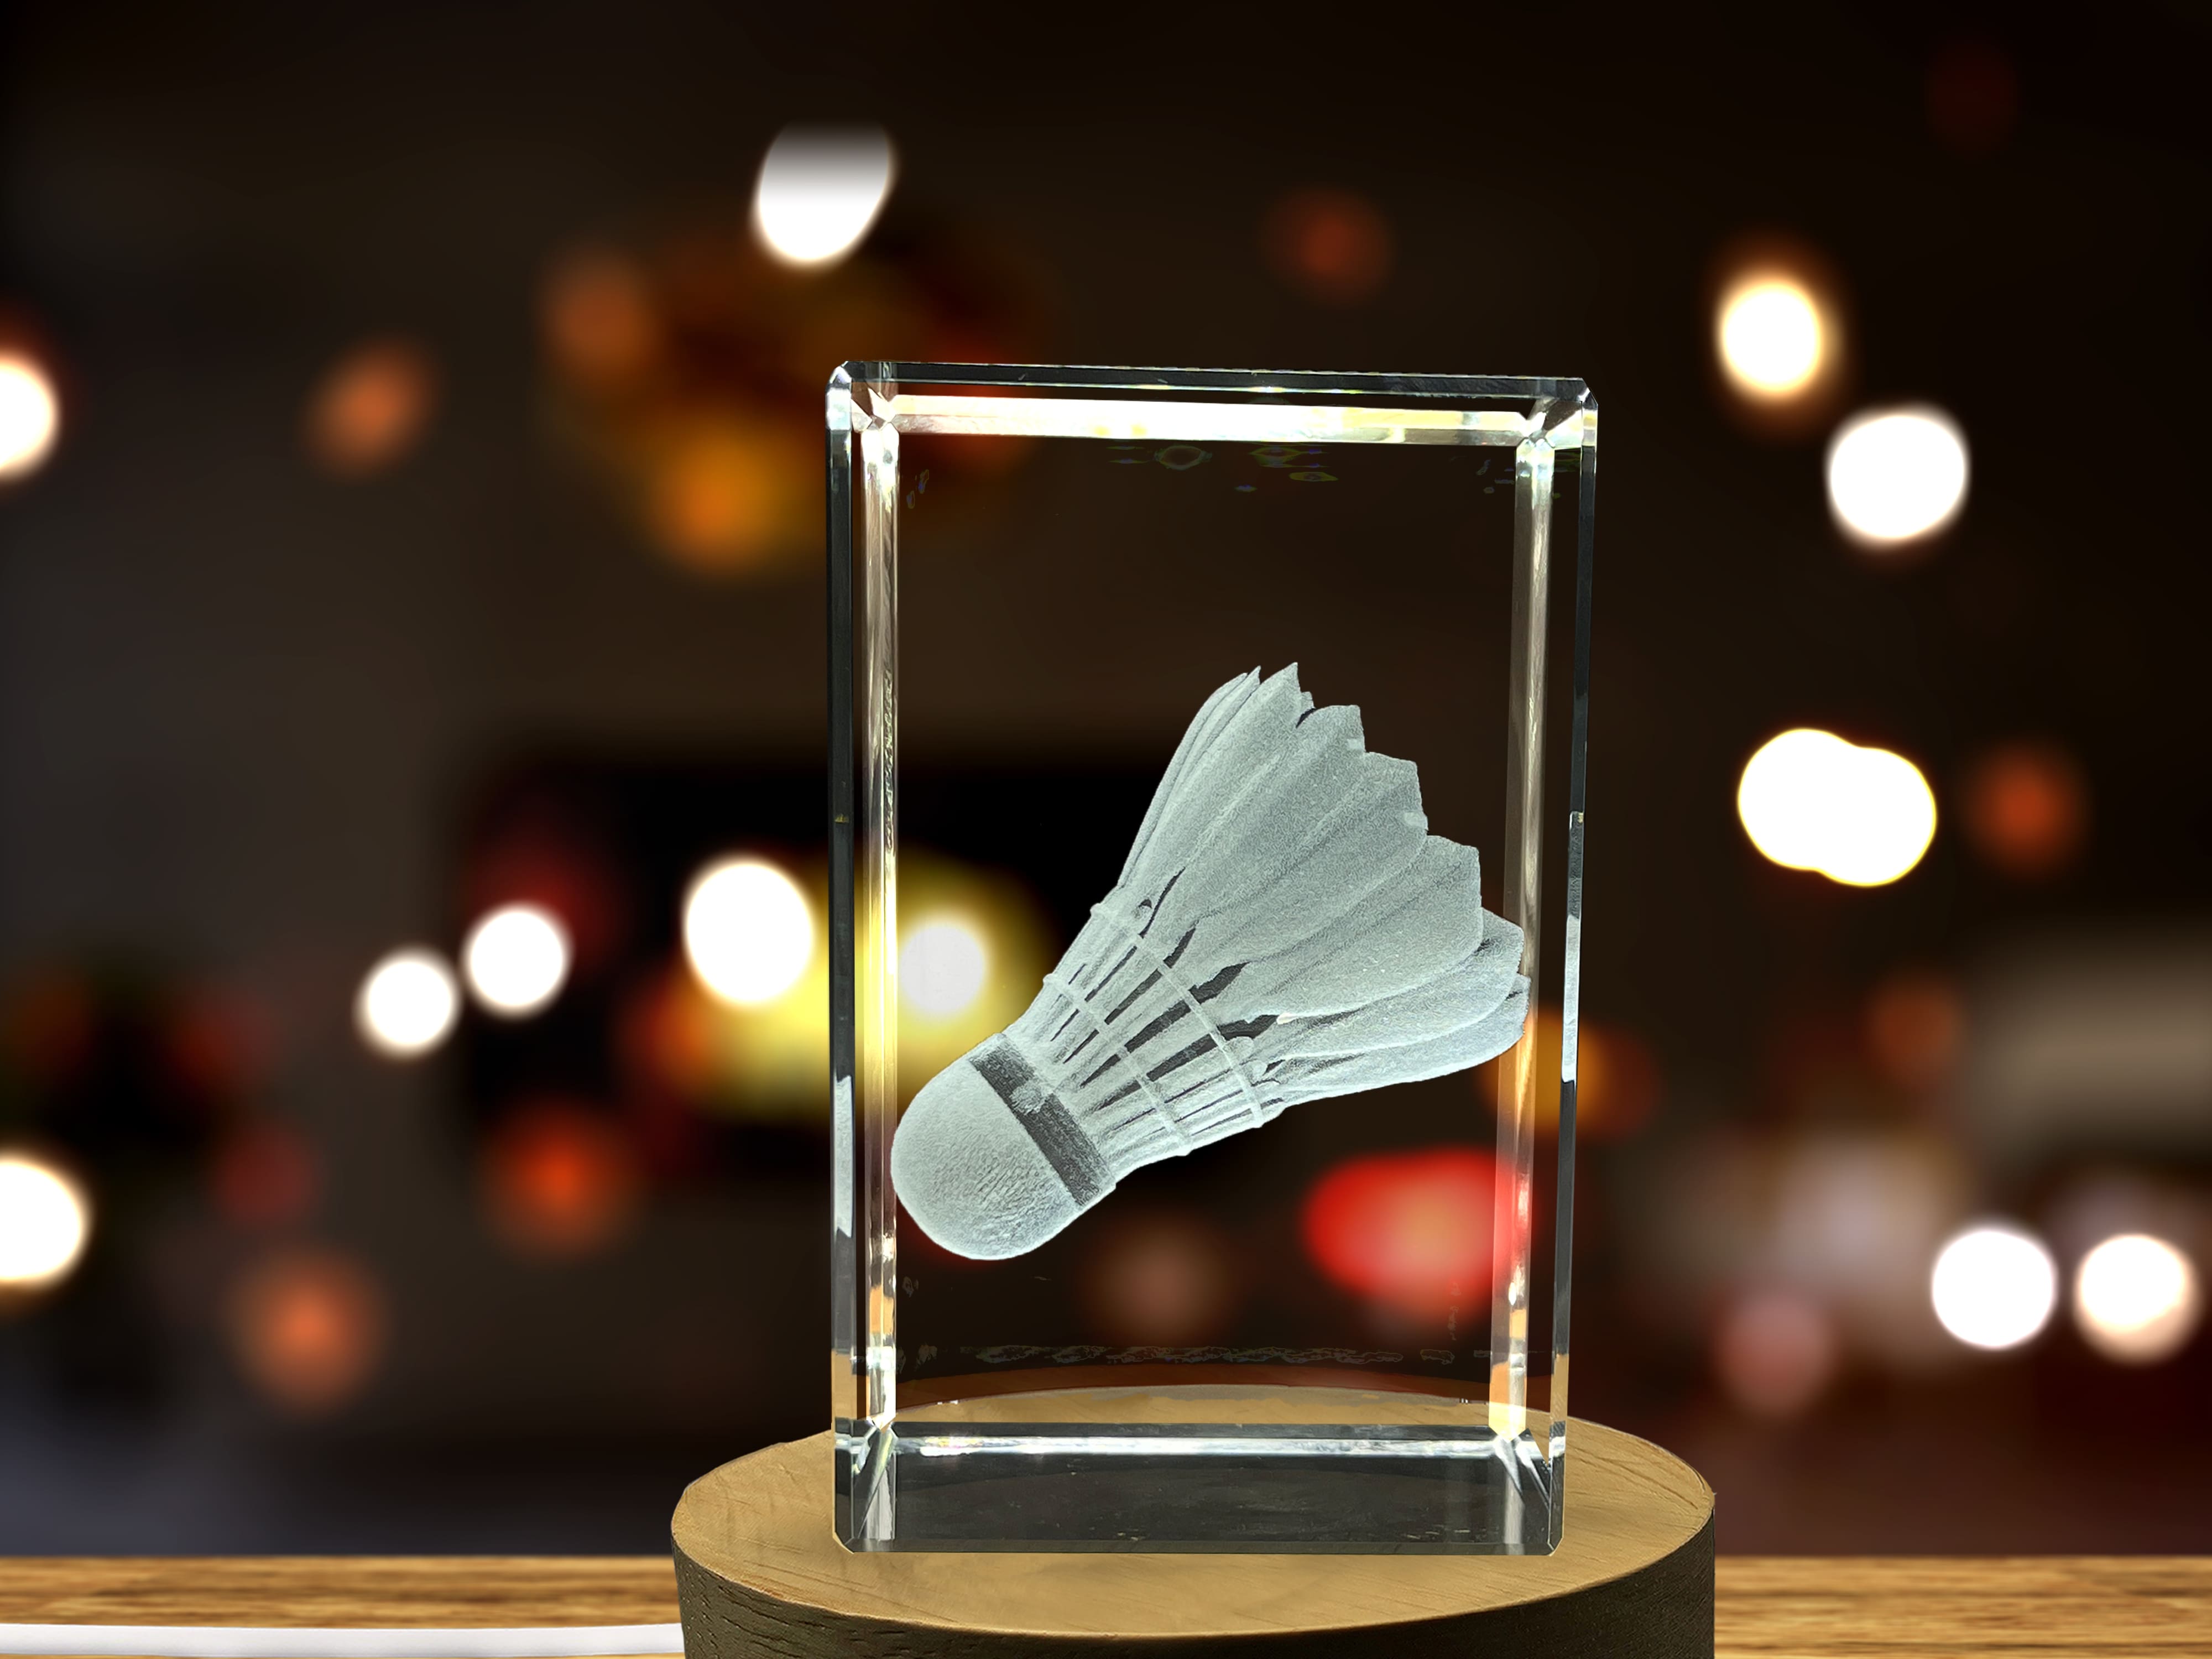 3D Engraved Badminton Crystal Keepsake - Illuminate Your Space with Art A&B Crystal Collection